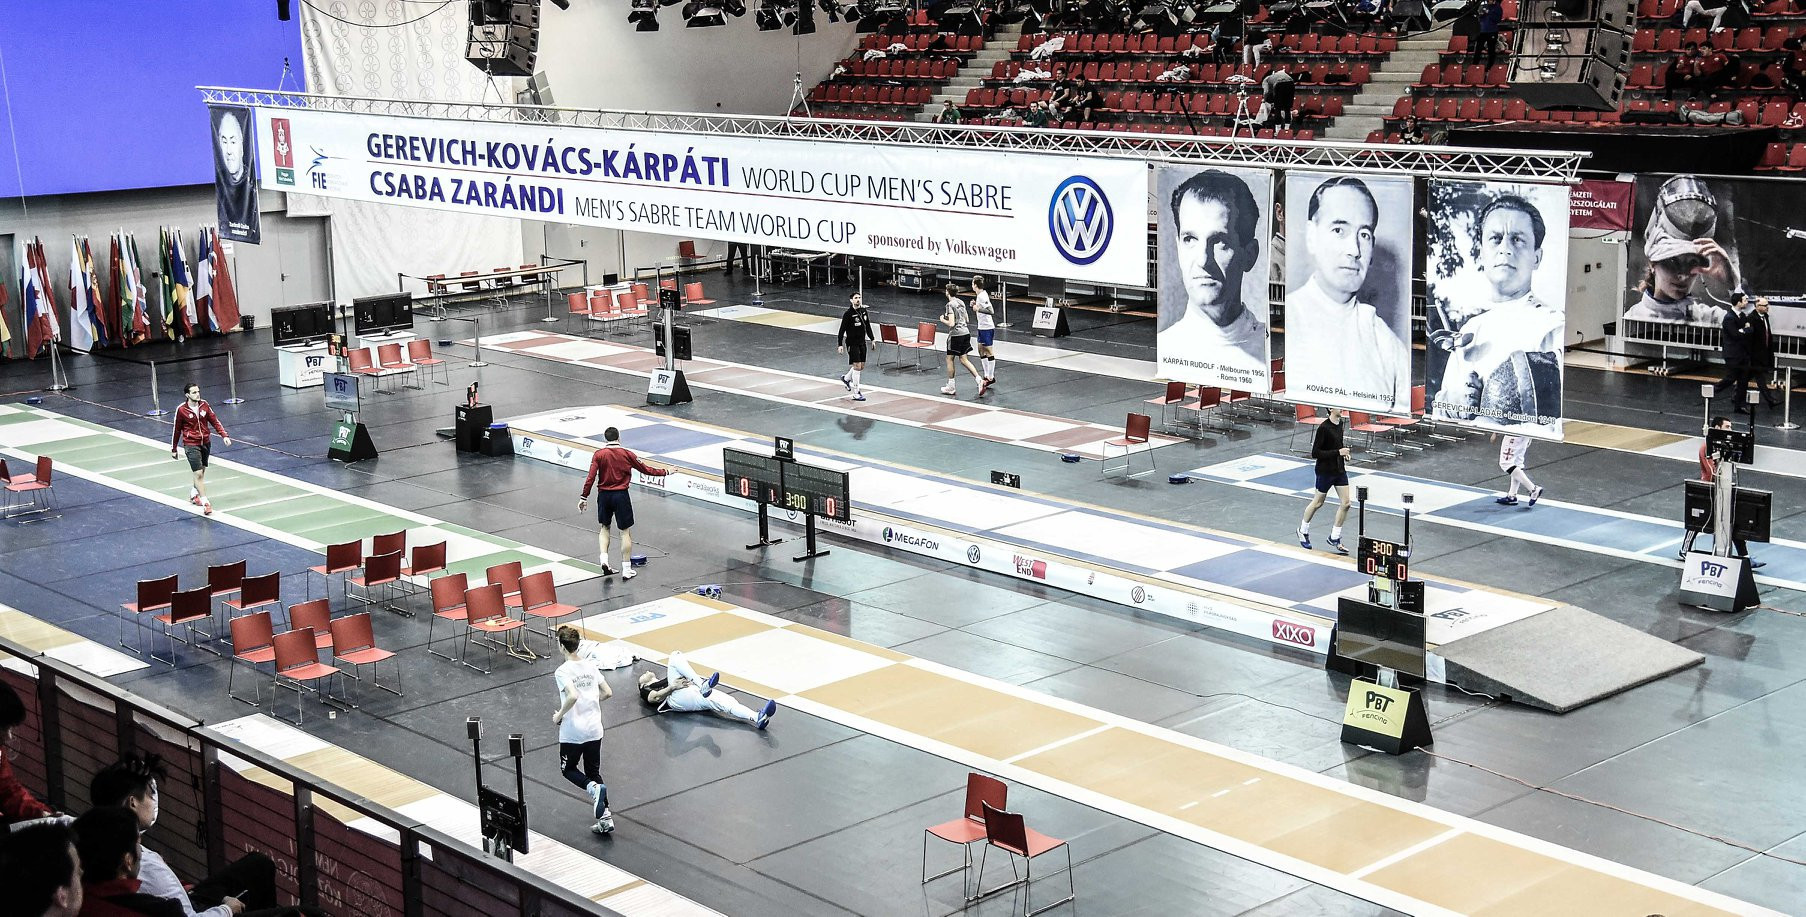 Top seed Dershwitz to begin FIE Men's Sabre World Cup campaign against home favourite in Budapest